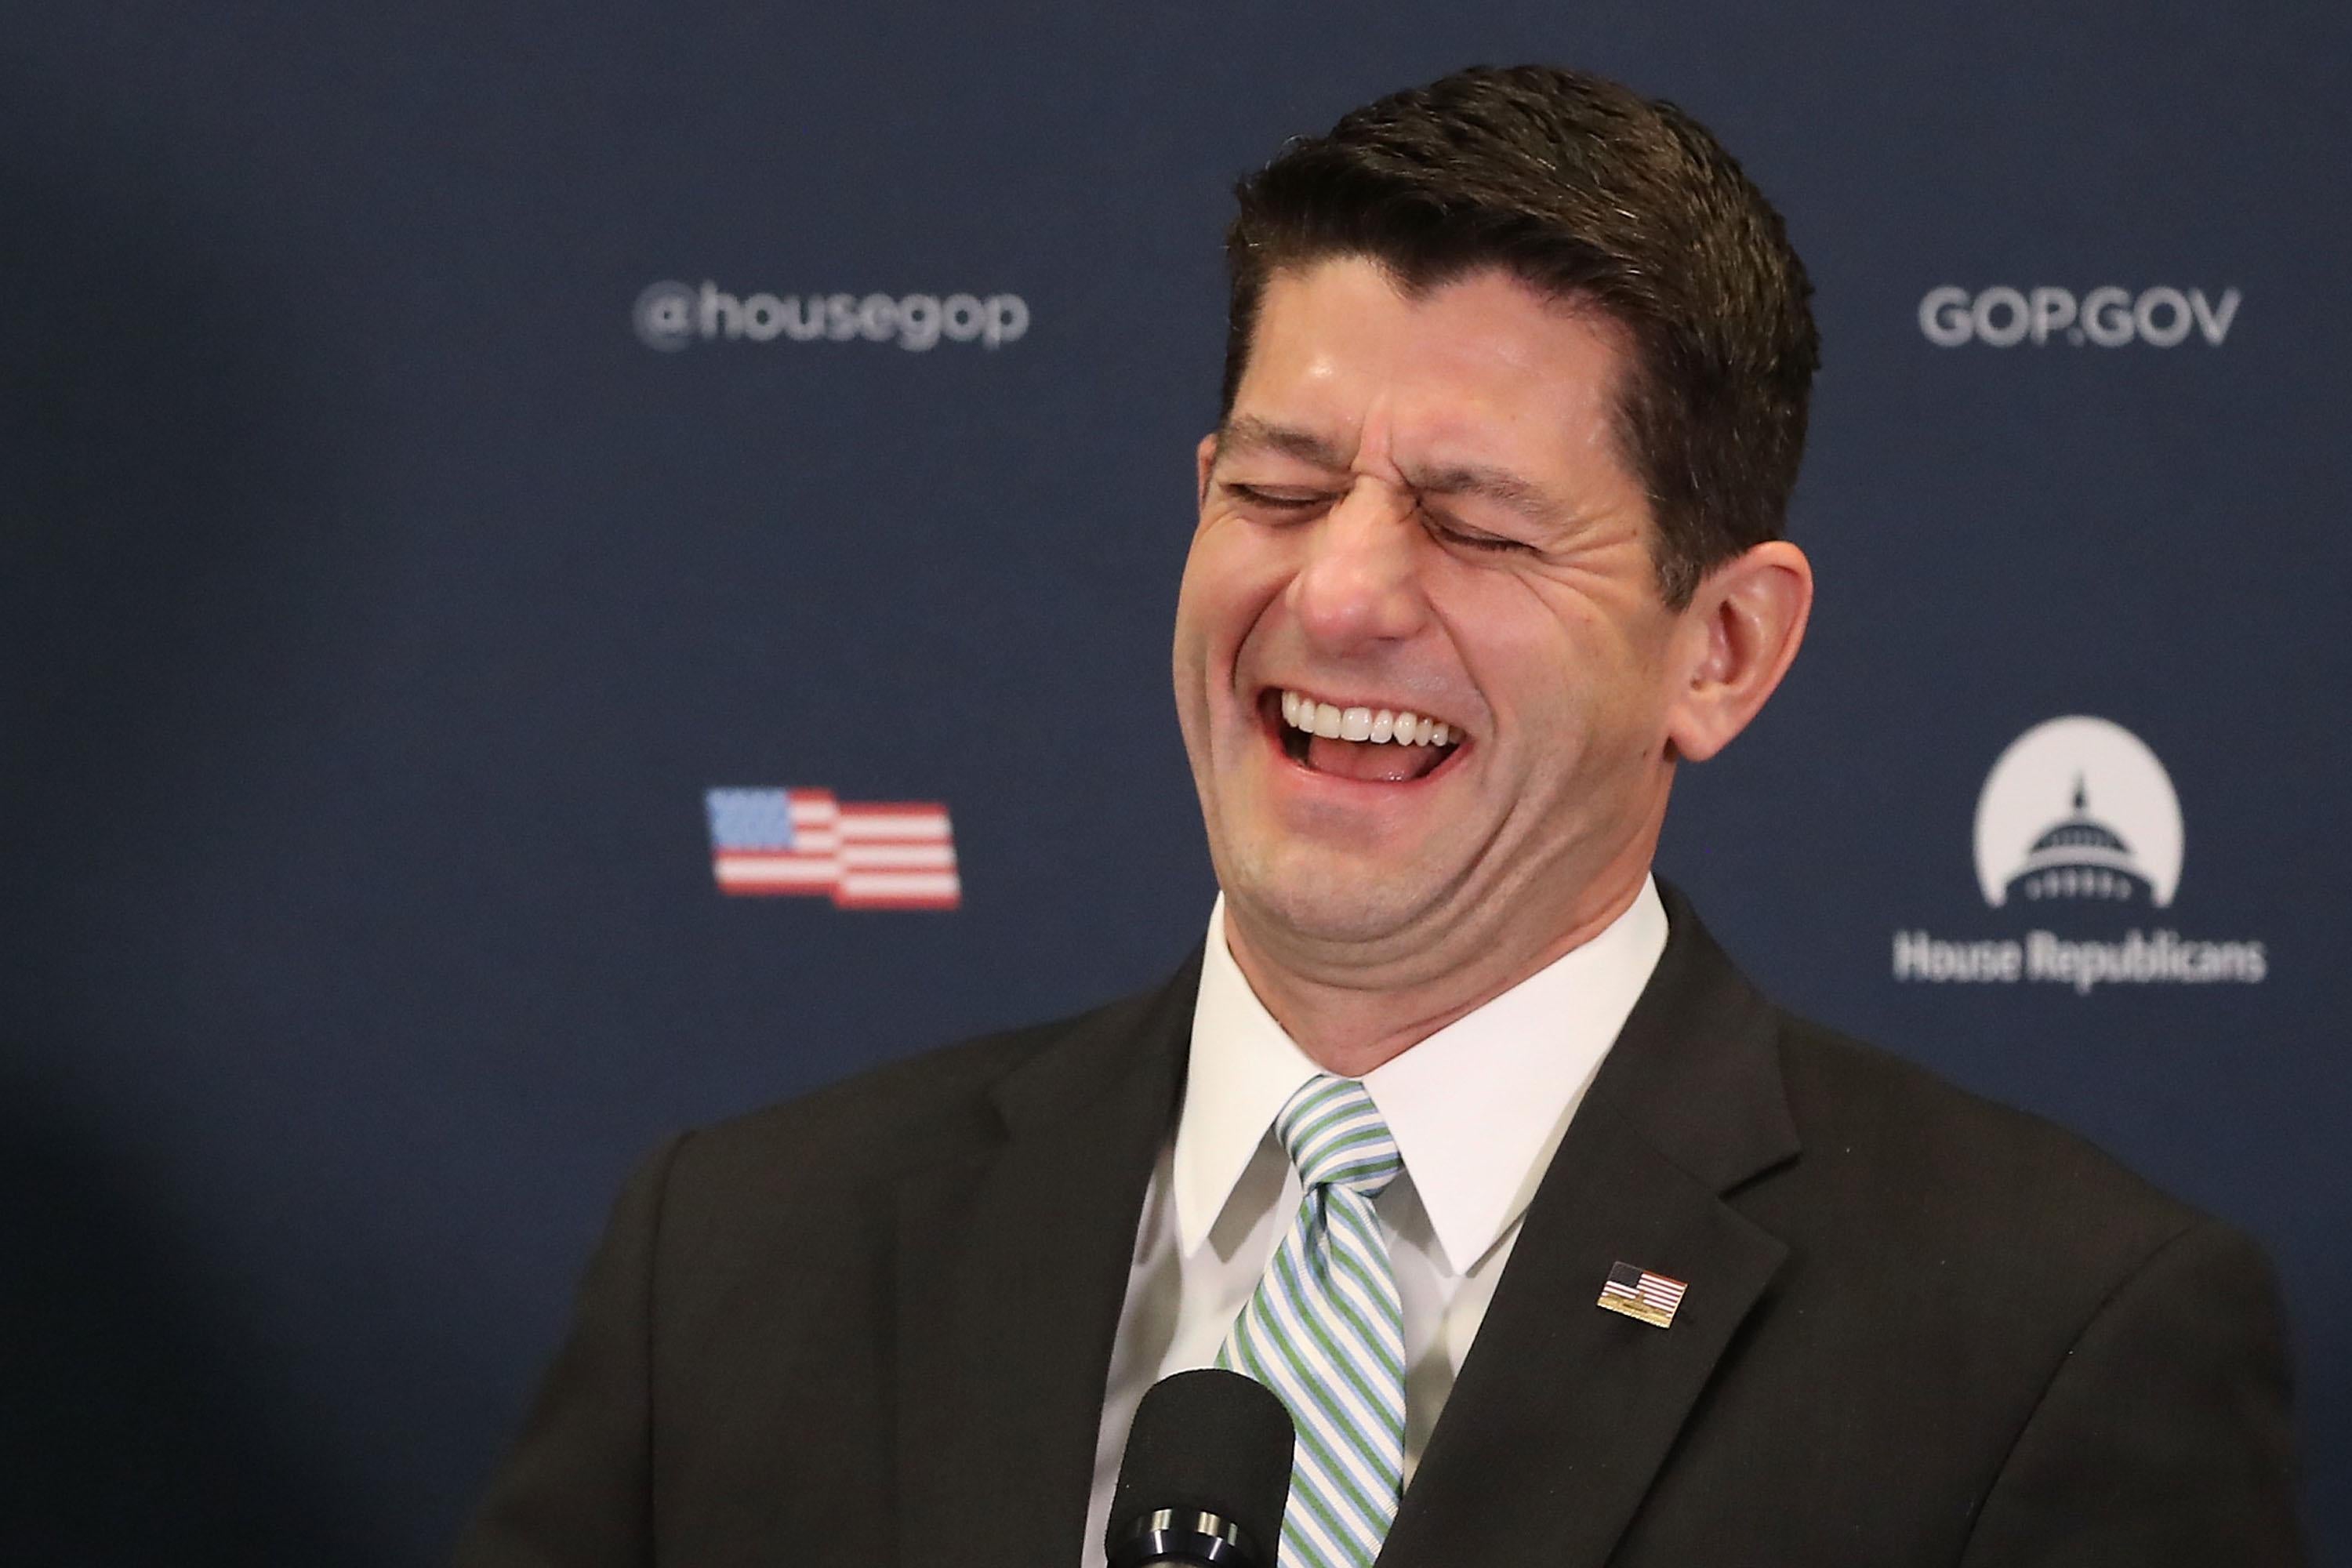 WASHINGTON, DC - APRIL 04:  House Speaker Paul Ryan (R-WI) laughs during a media briefing after attending a closed House Republican conference, on Capitol Hill, on April 4, 2017 in Washington, DC. Speaker Ryan spoke on issues regarding healthcare and House Intelligence Committee Chairman Nunes.  (Photo by Mark Wilson/Getty Images)